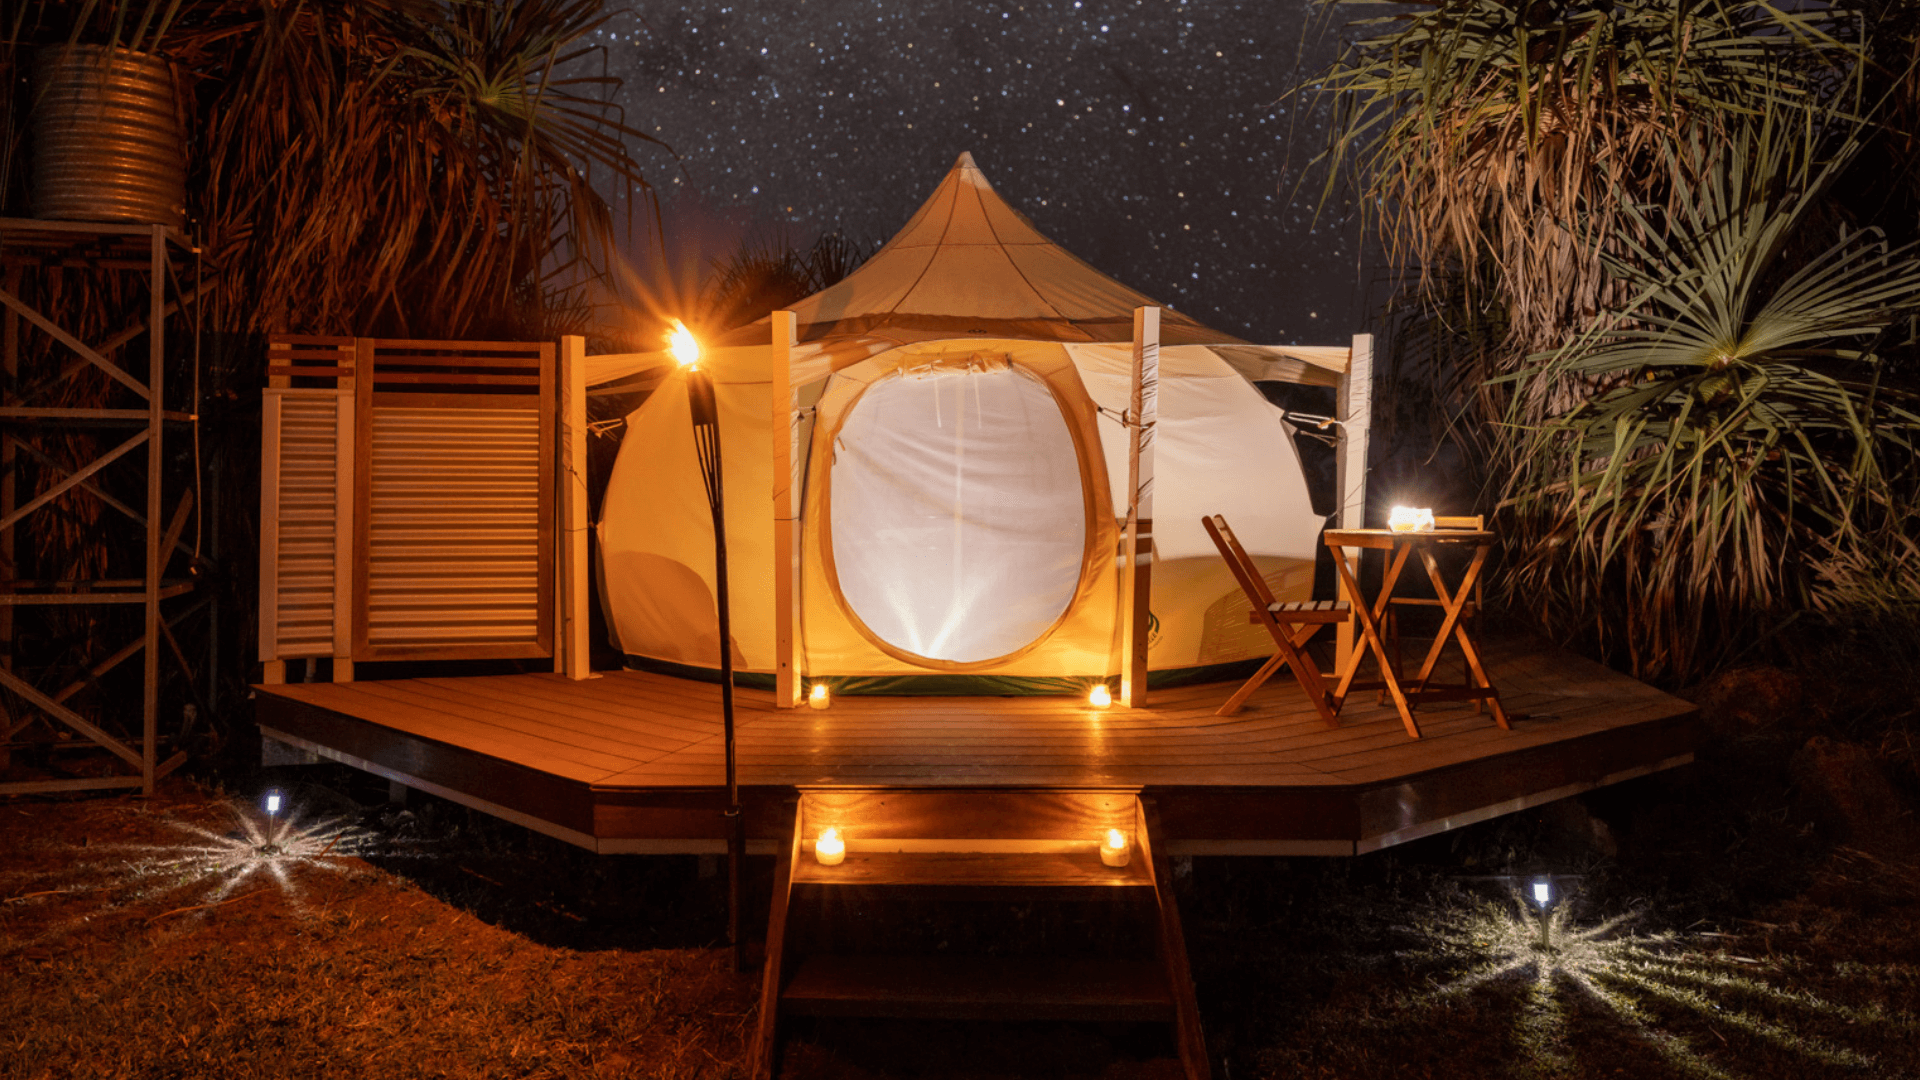 Top End Safari Camp luxury glamping accommodation